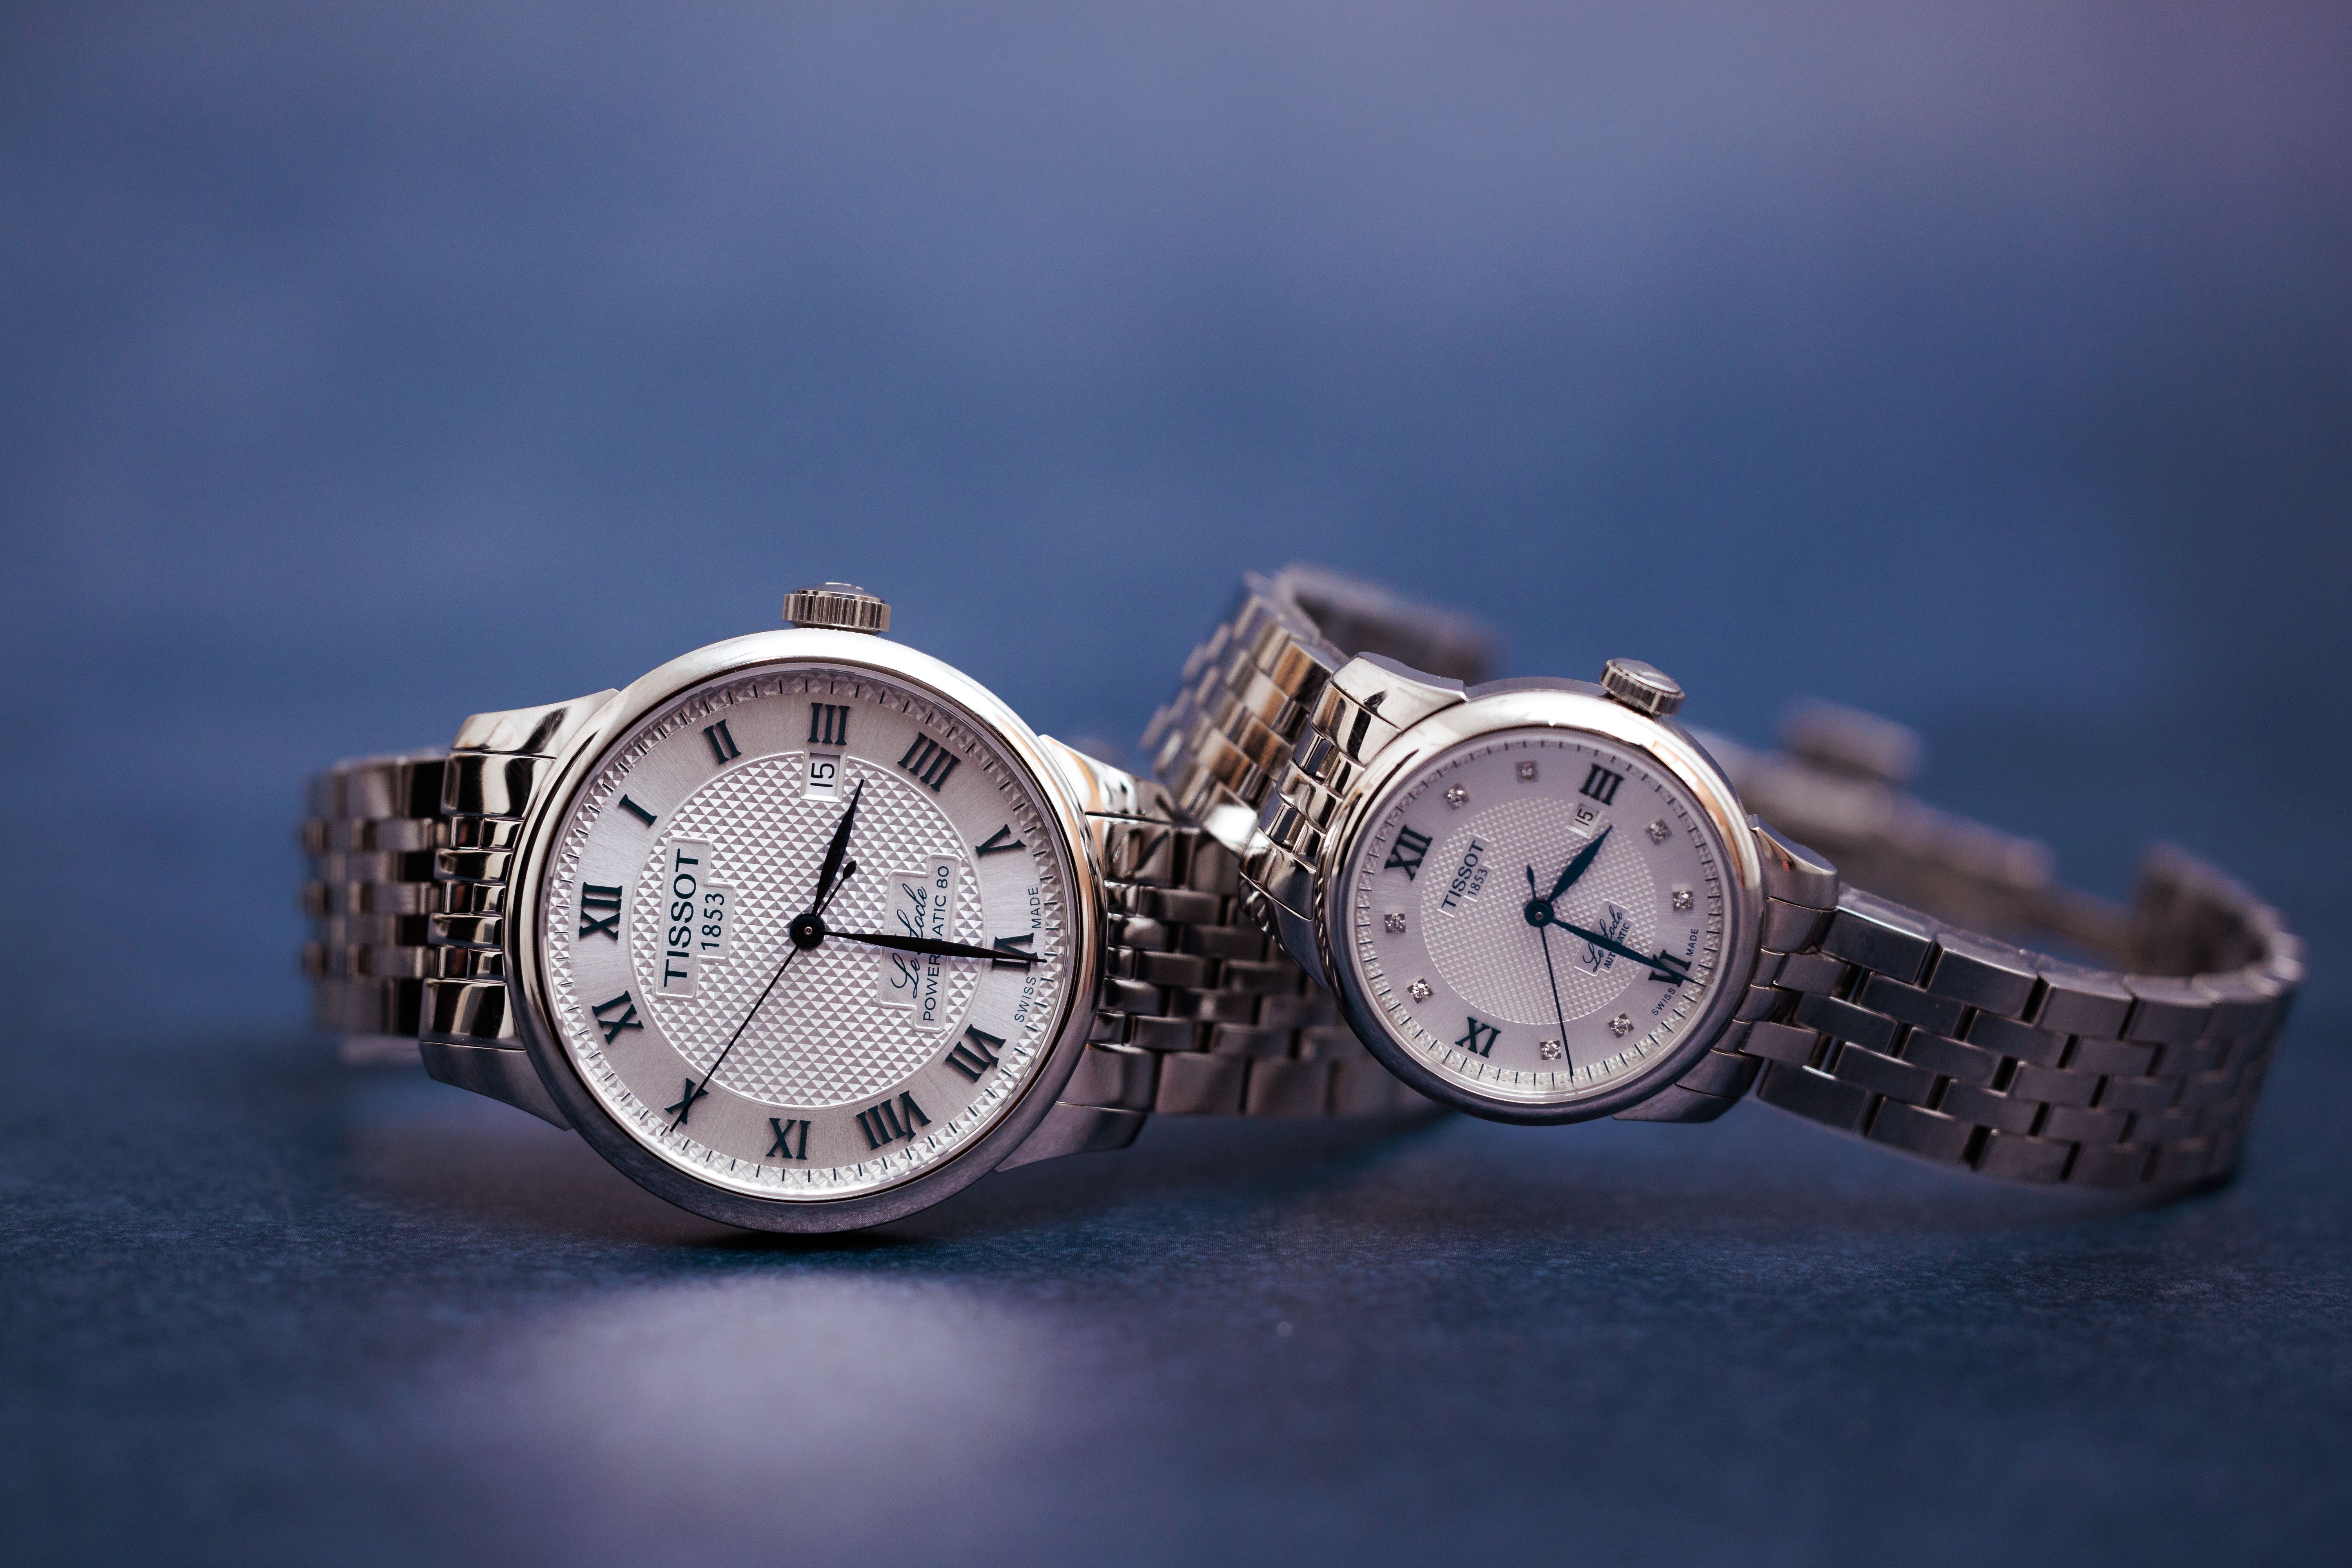 Tissot Le Locle 20th Anniversary: The Beauty Of Simplicity In A Genuinely Elegant Timepiece